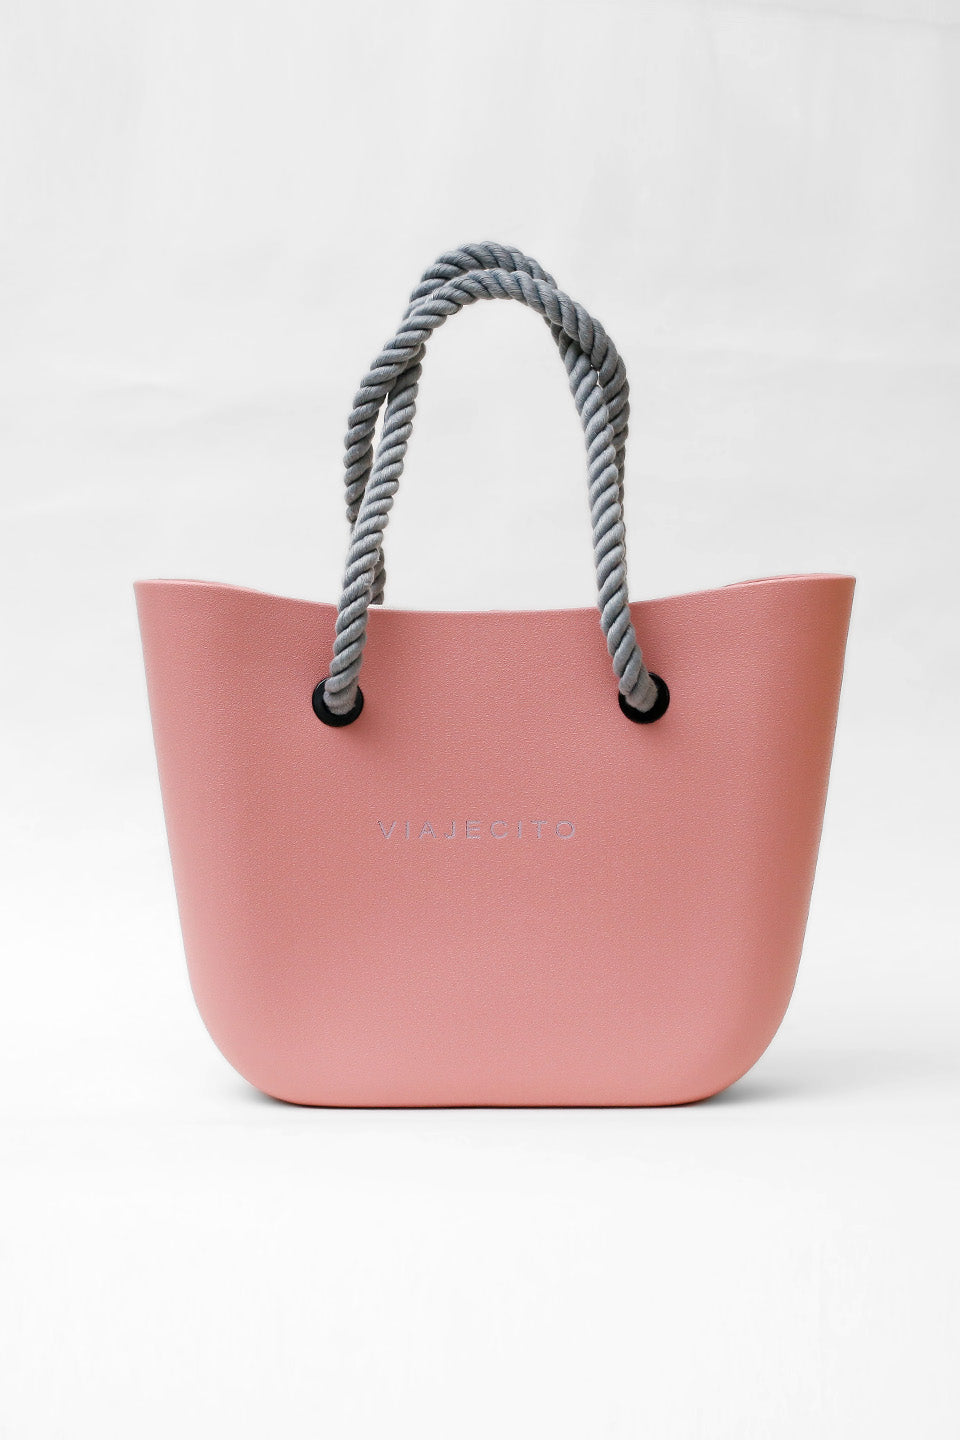 Totes - Standard Size